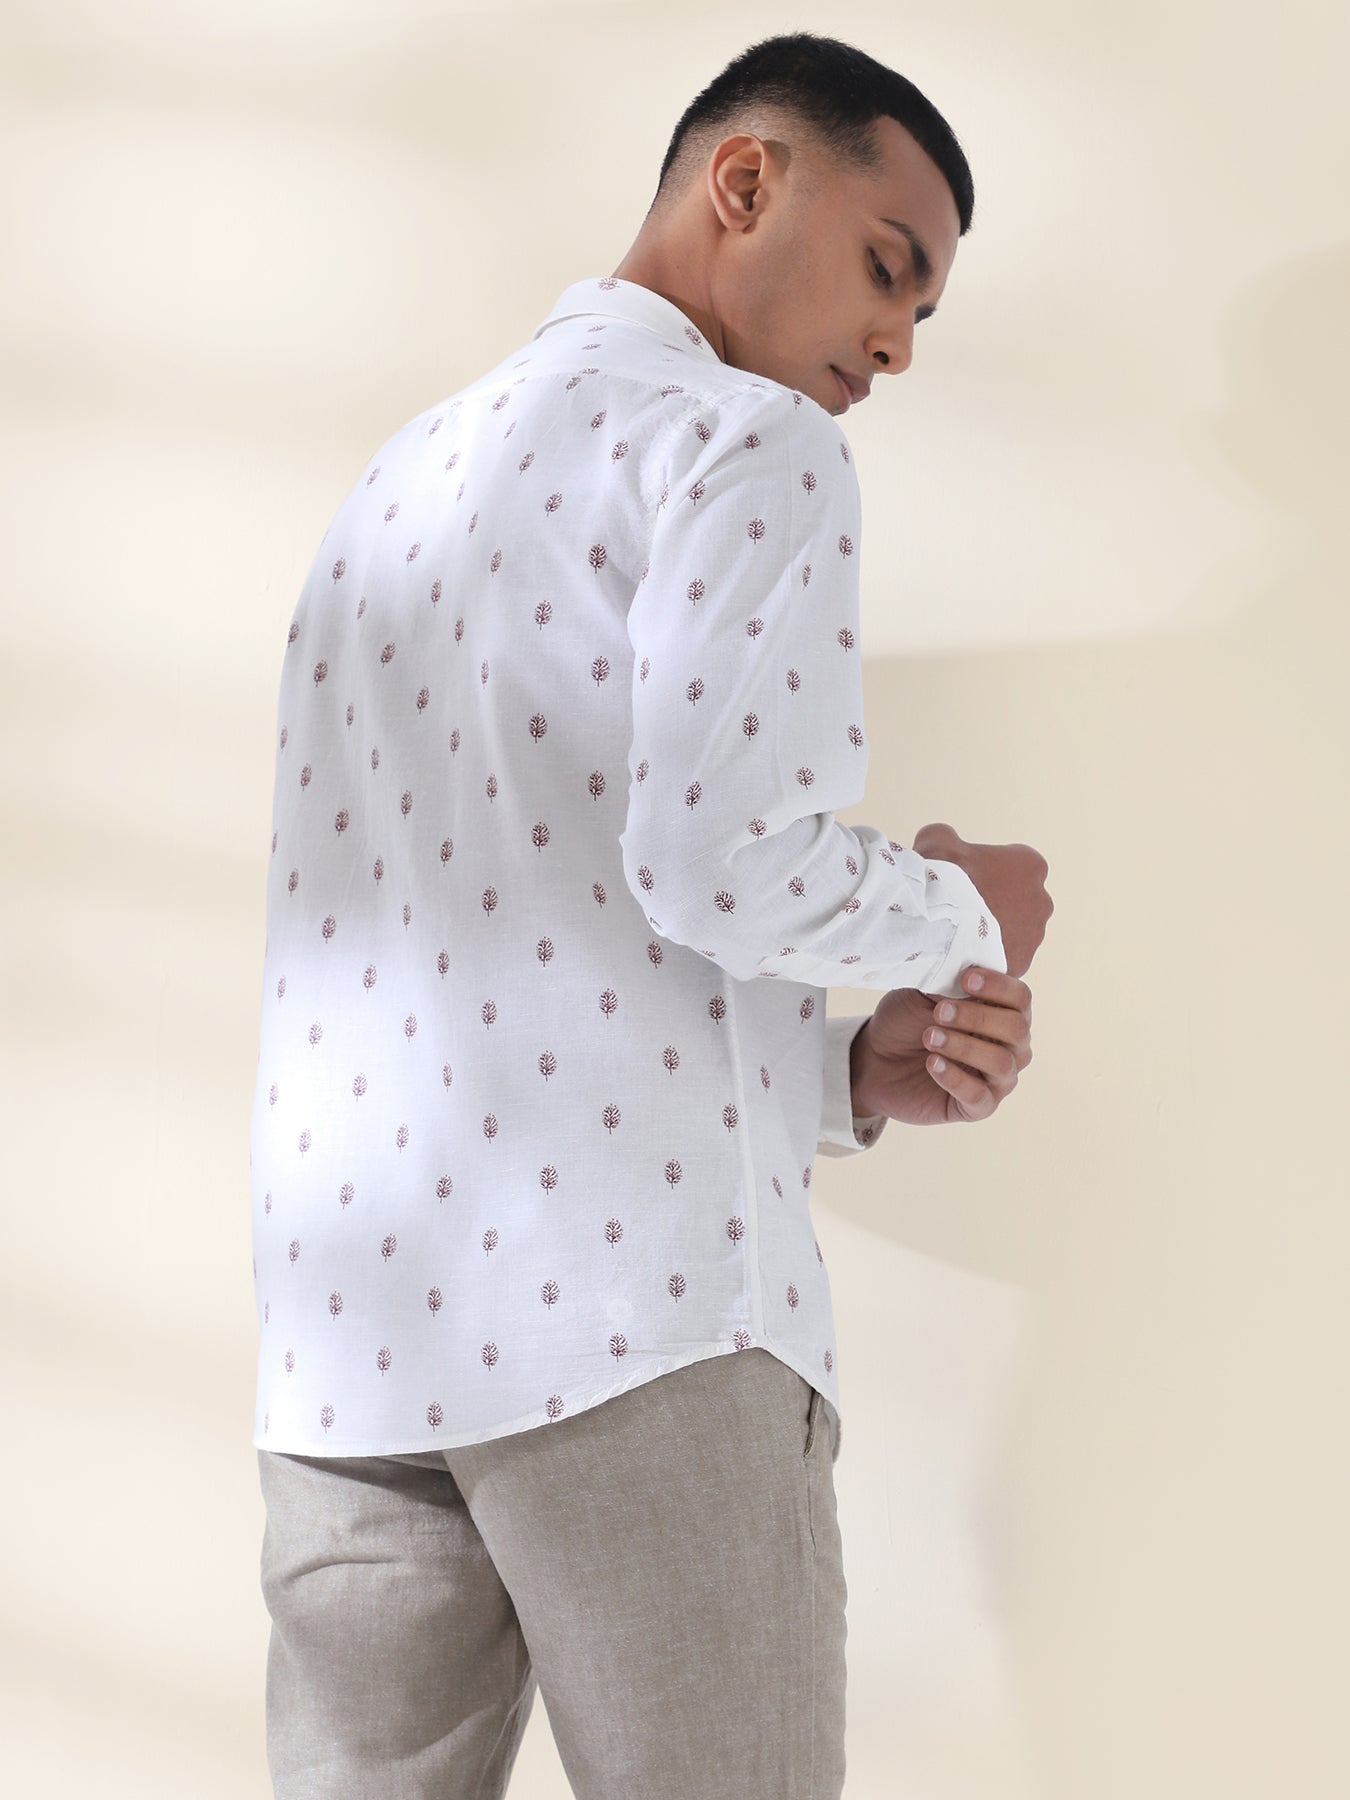 Cotton Linen White Printed Full Sleeve Casual Shirt